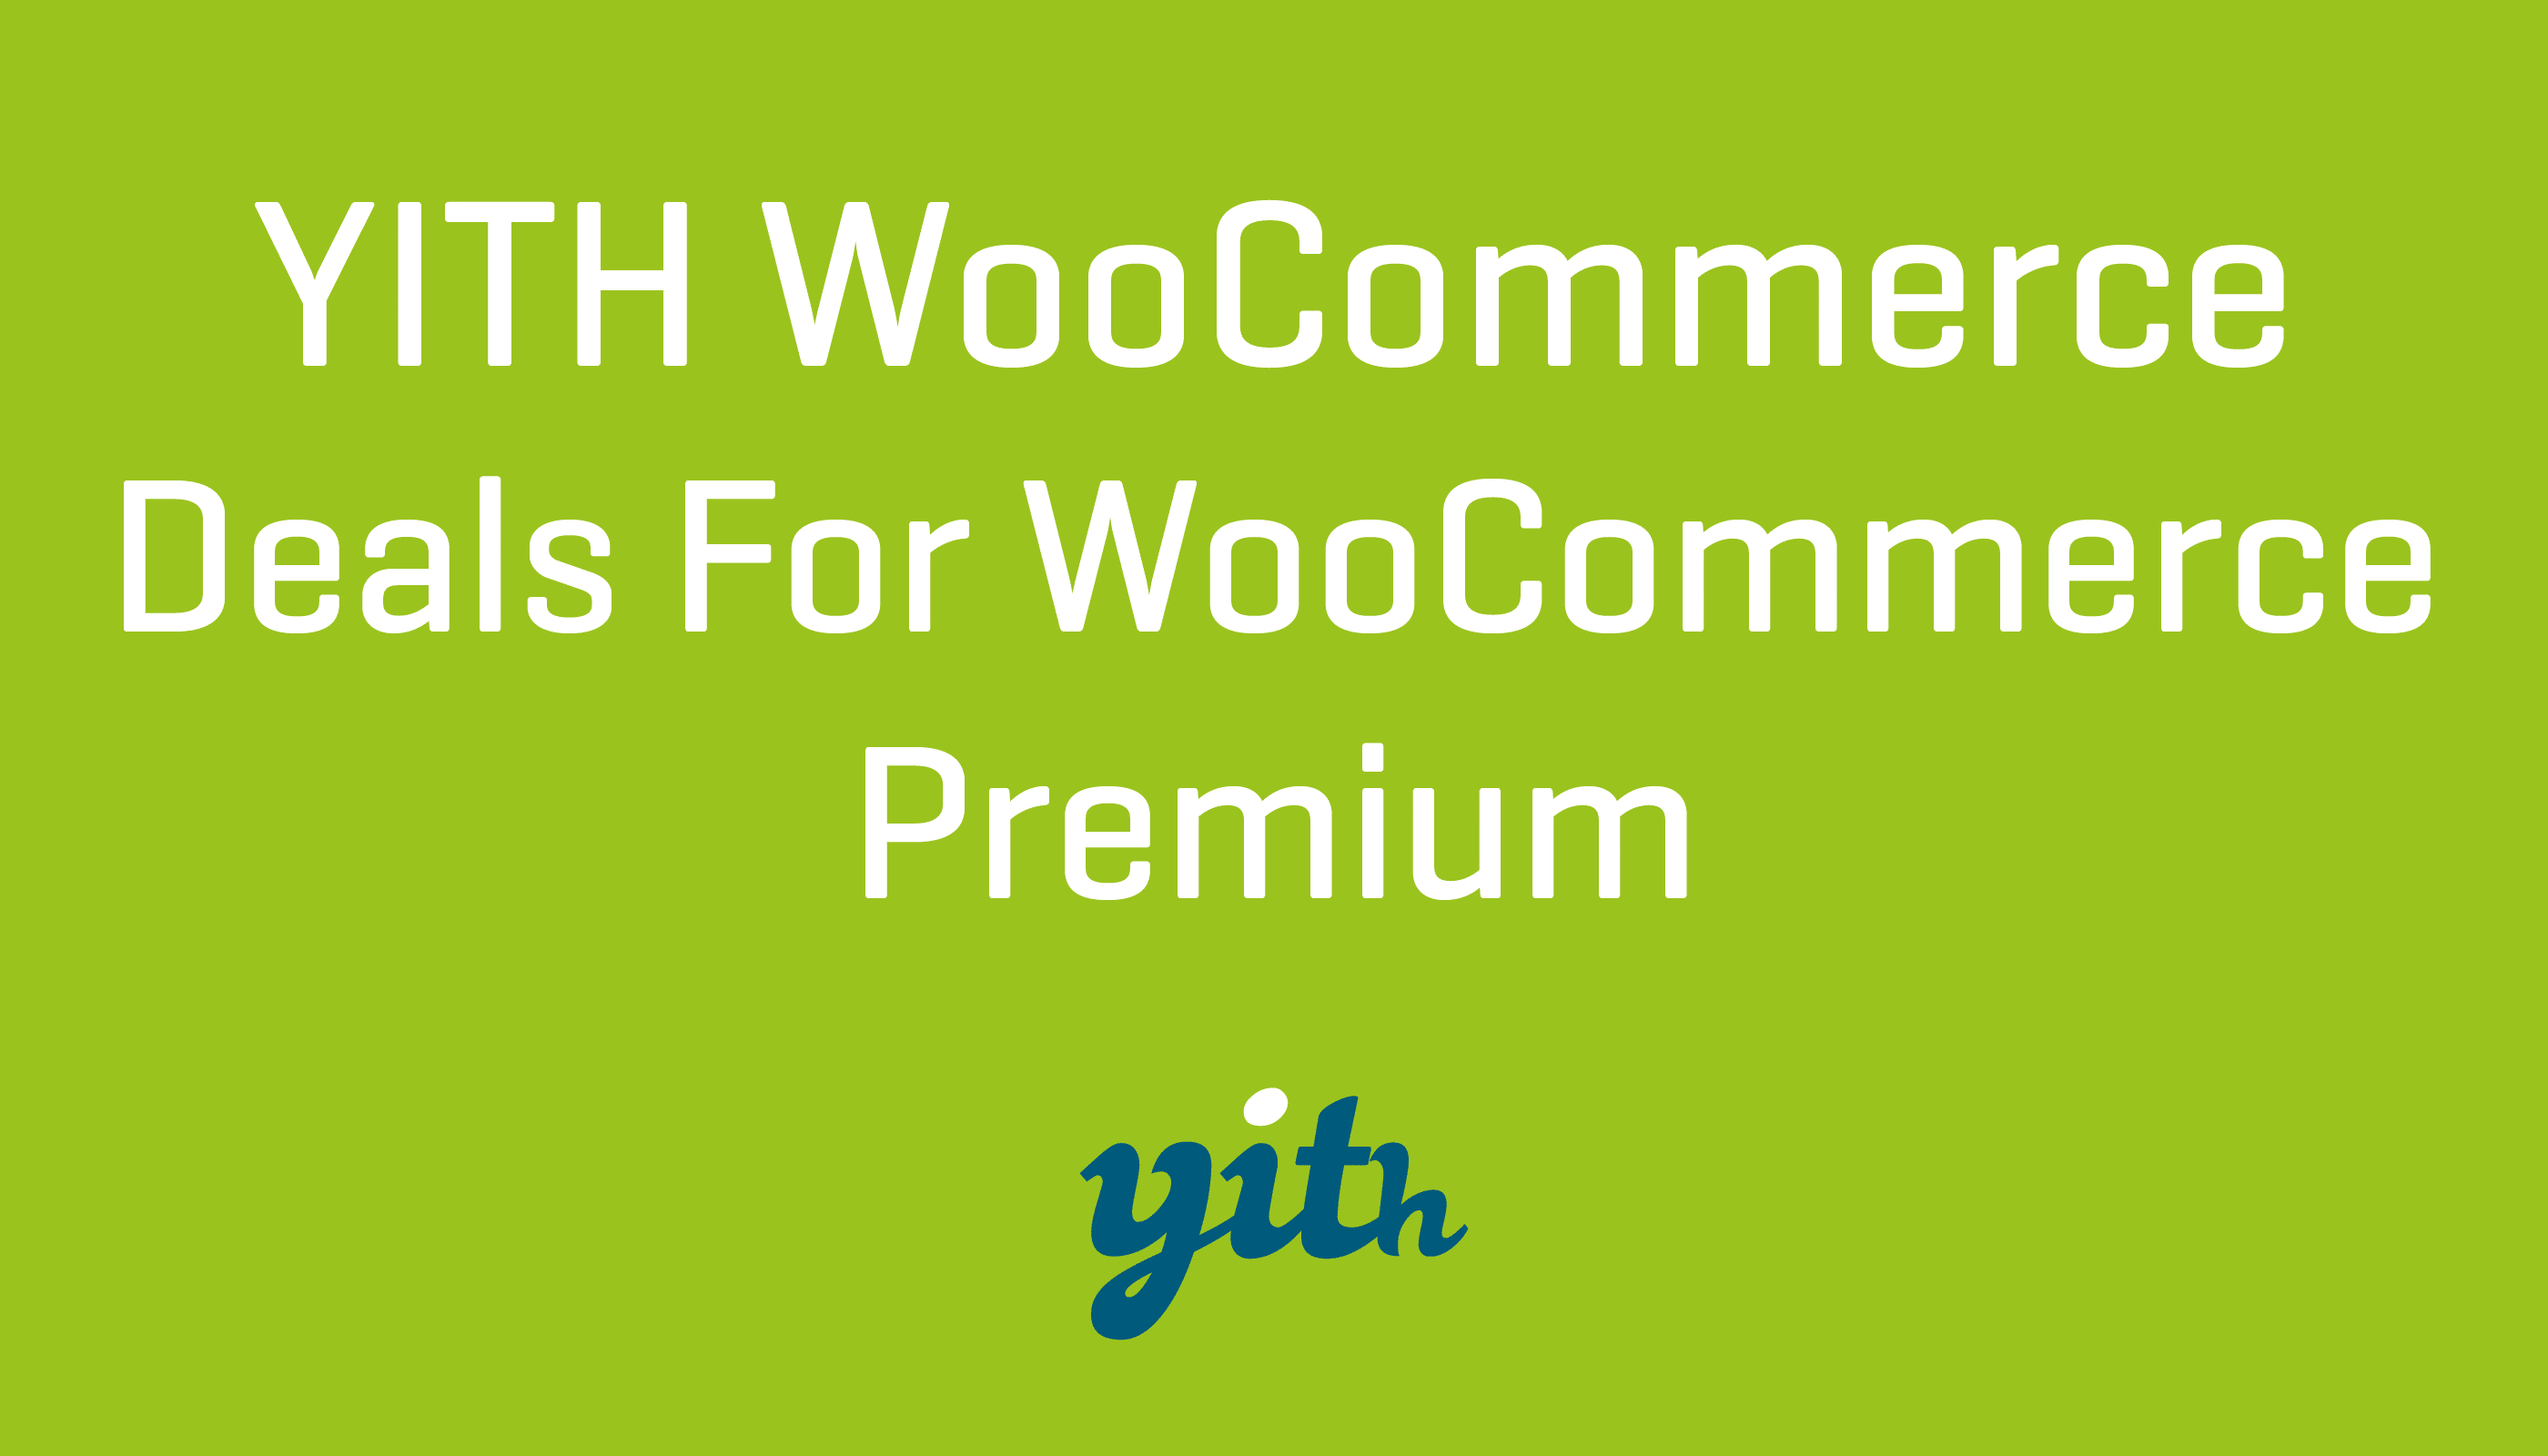 YITH WooCommerce Deals for WooCommerce